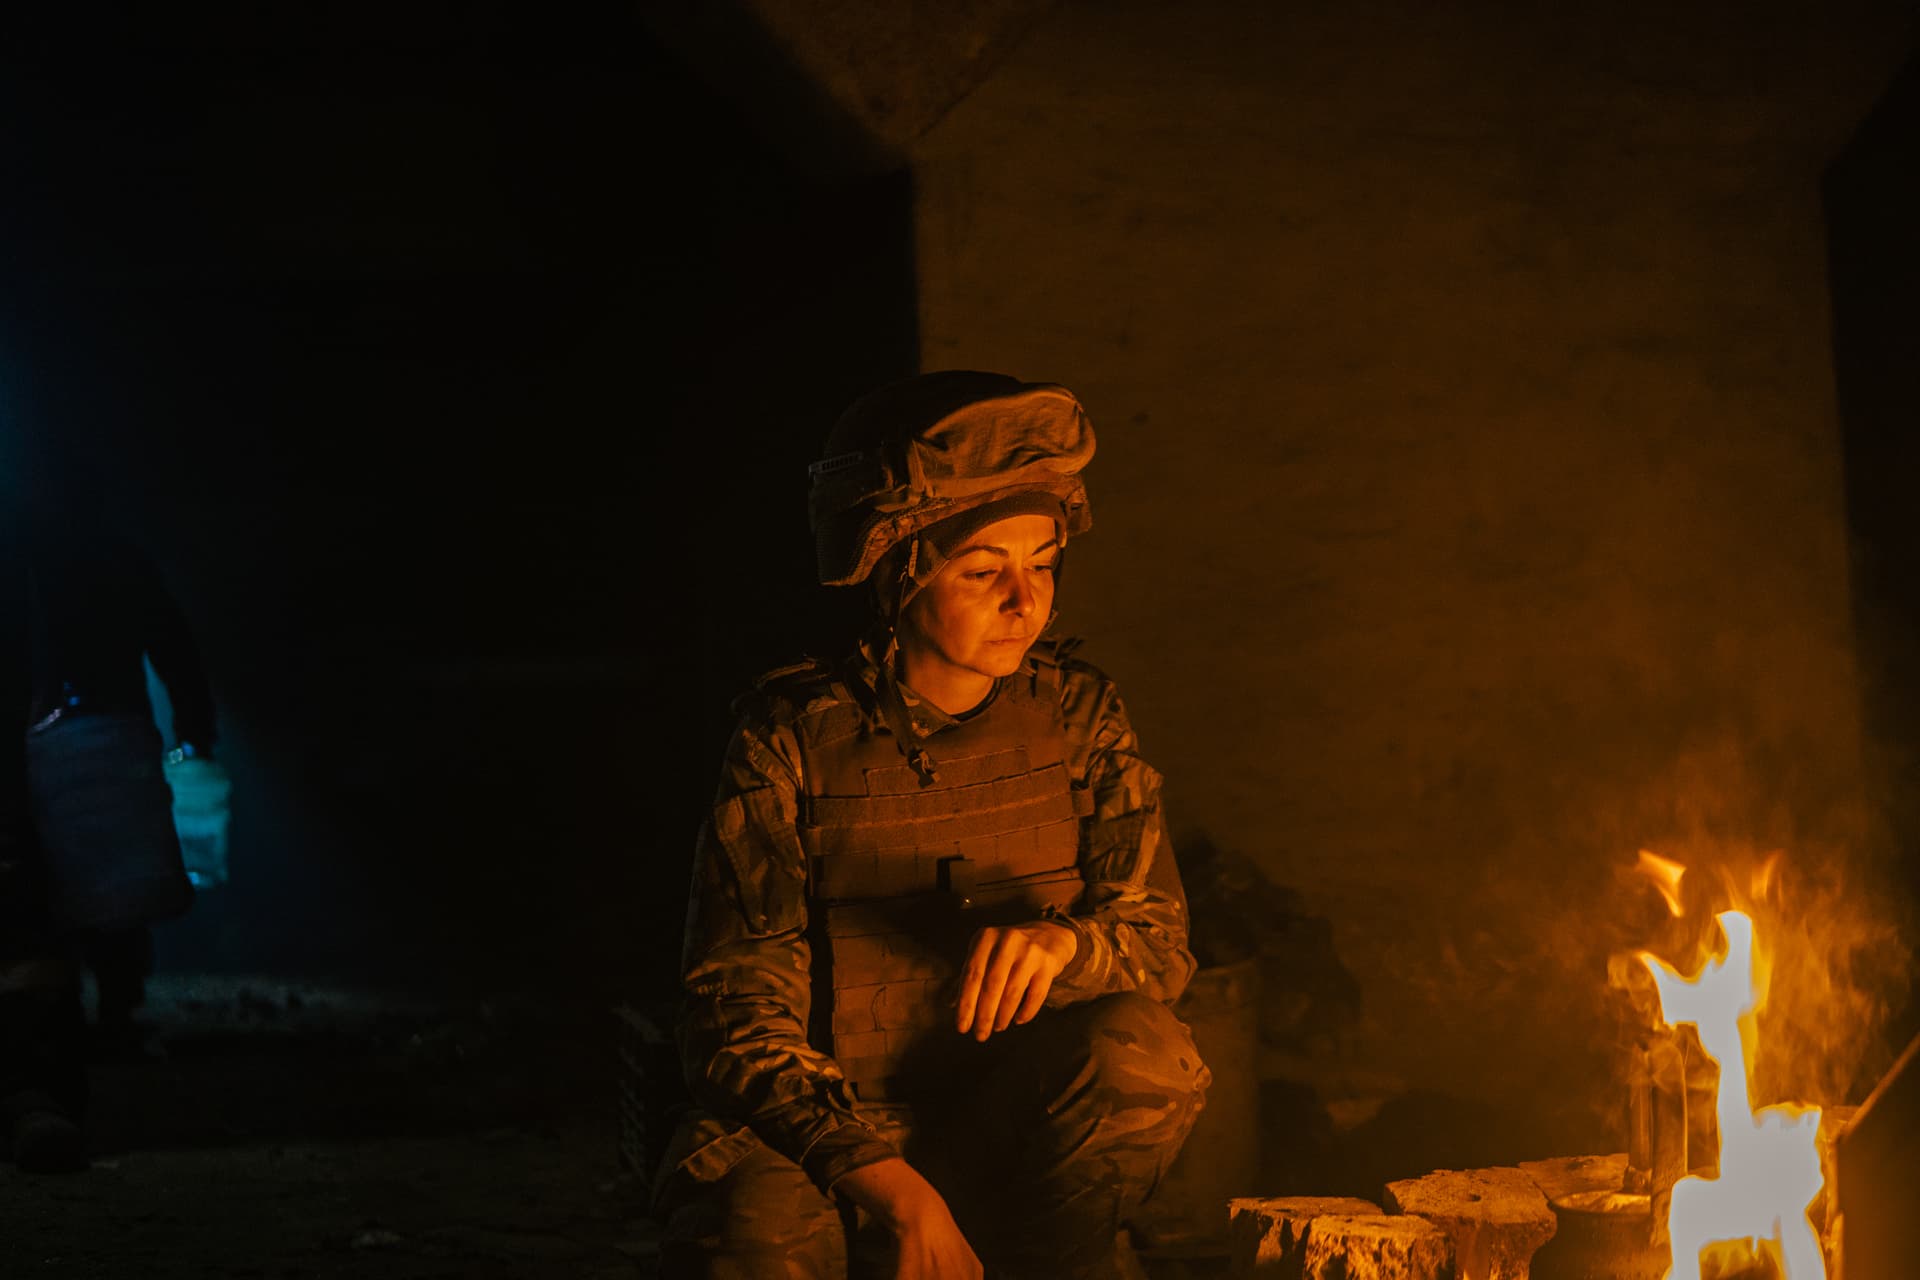 A Ukrainian woman soldier inside the ruined Azovstal steel plant take a rest in his shelter in Mariupol